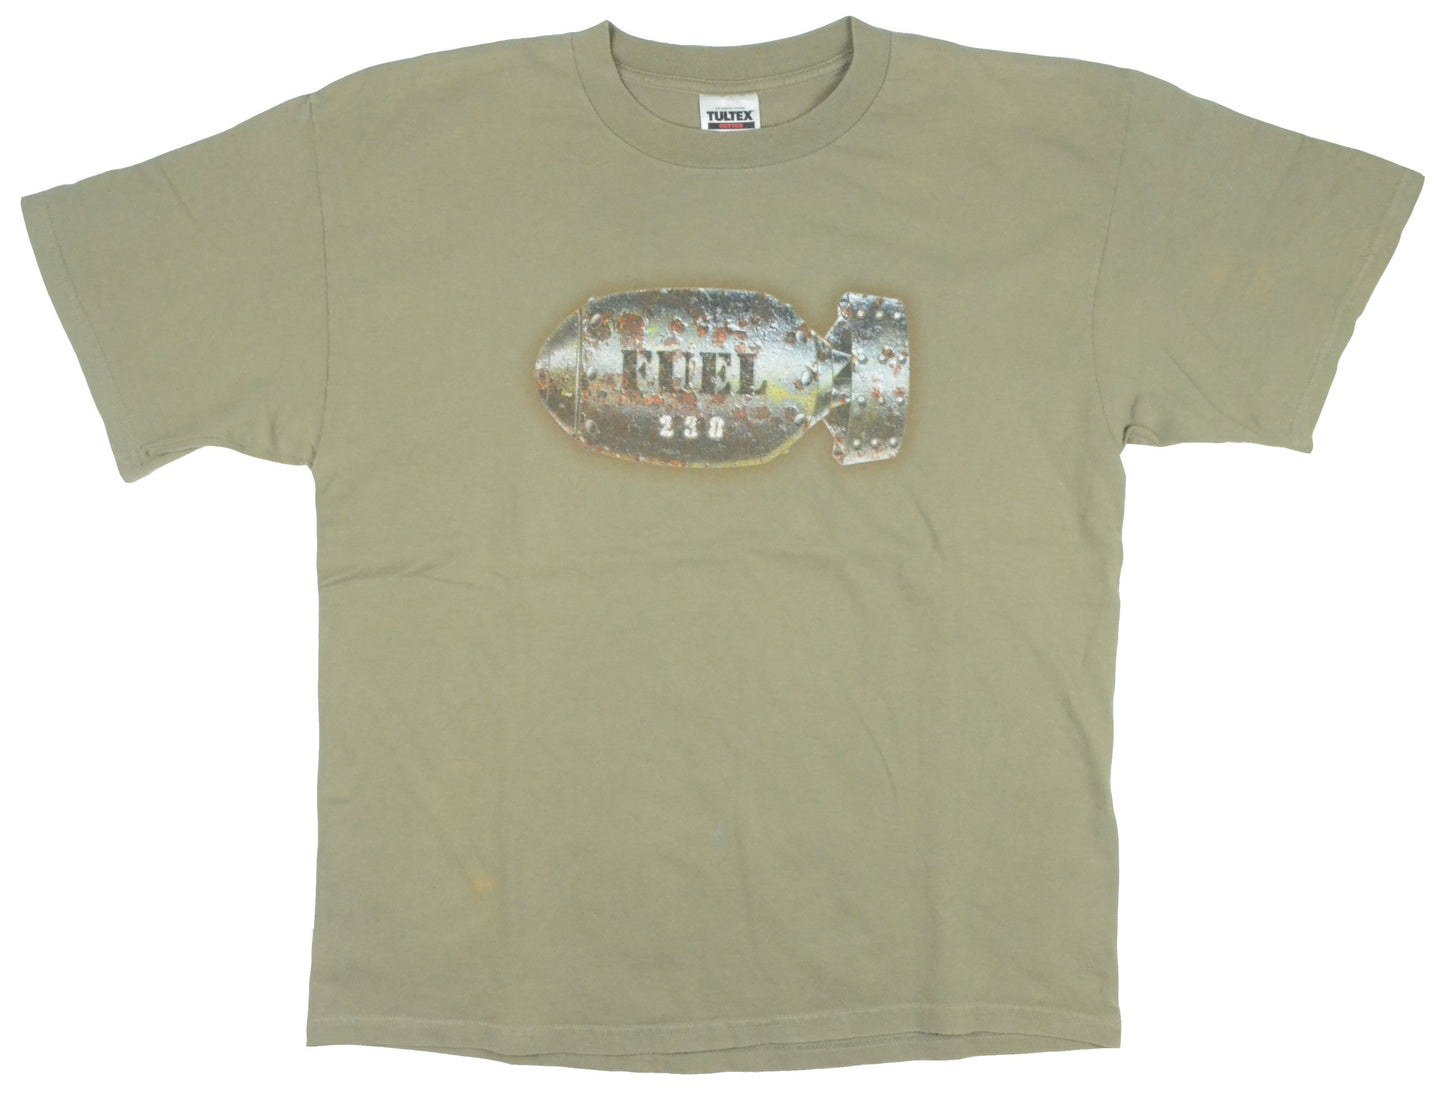 Vintage Fuel 1999 "Sunburn" Band Shirt  Sunburn was the band's first album. The best song of the project, "Shimmer" reached no. 42 in the Billboard Hot 100. The reissue of the album in 2003 includes two new songs, "King for a Day" and "Walk the Sky". The last one included in the soundtrack of the famous movie Godzilla. The shirt is in excellent condition.